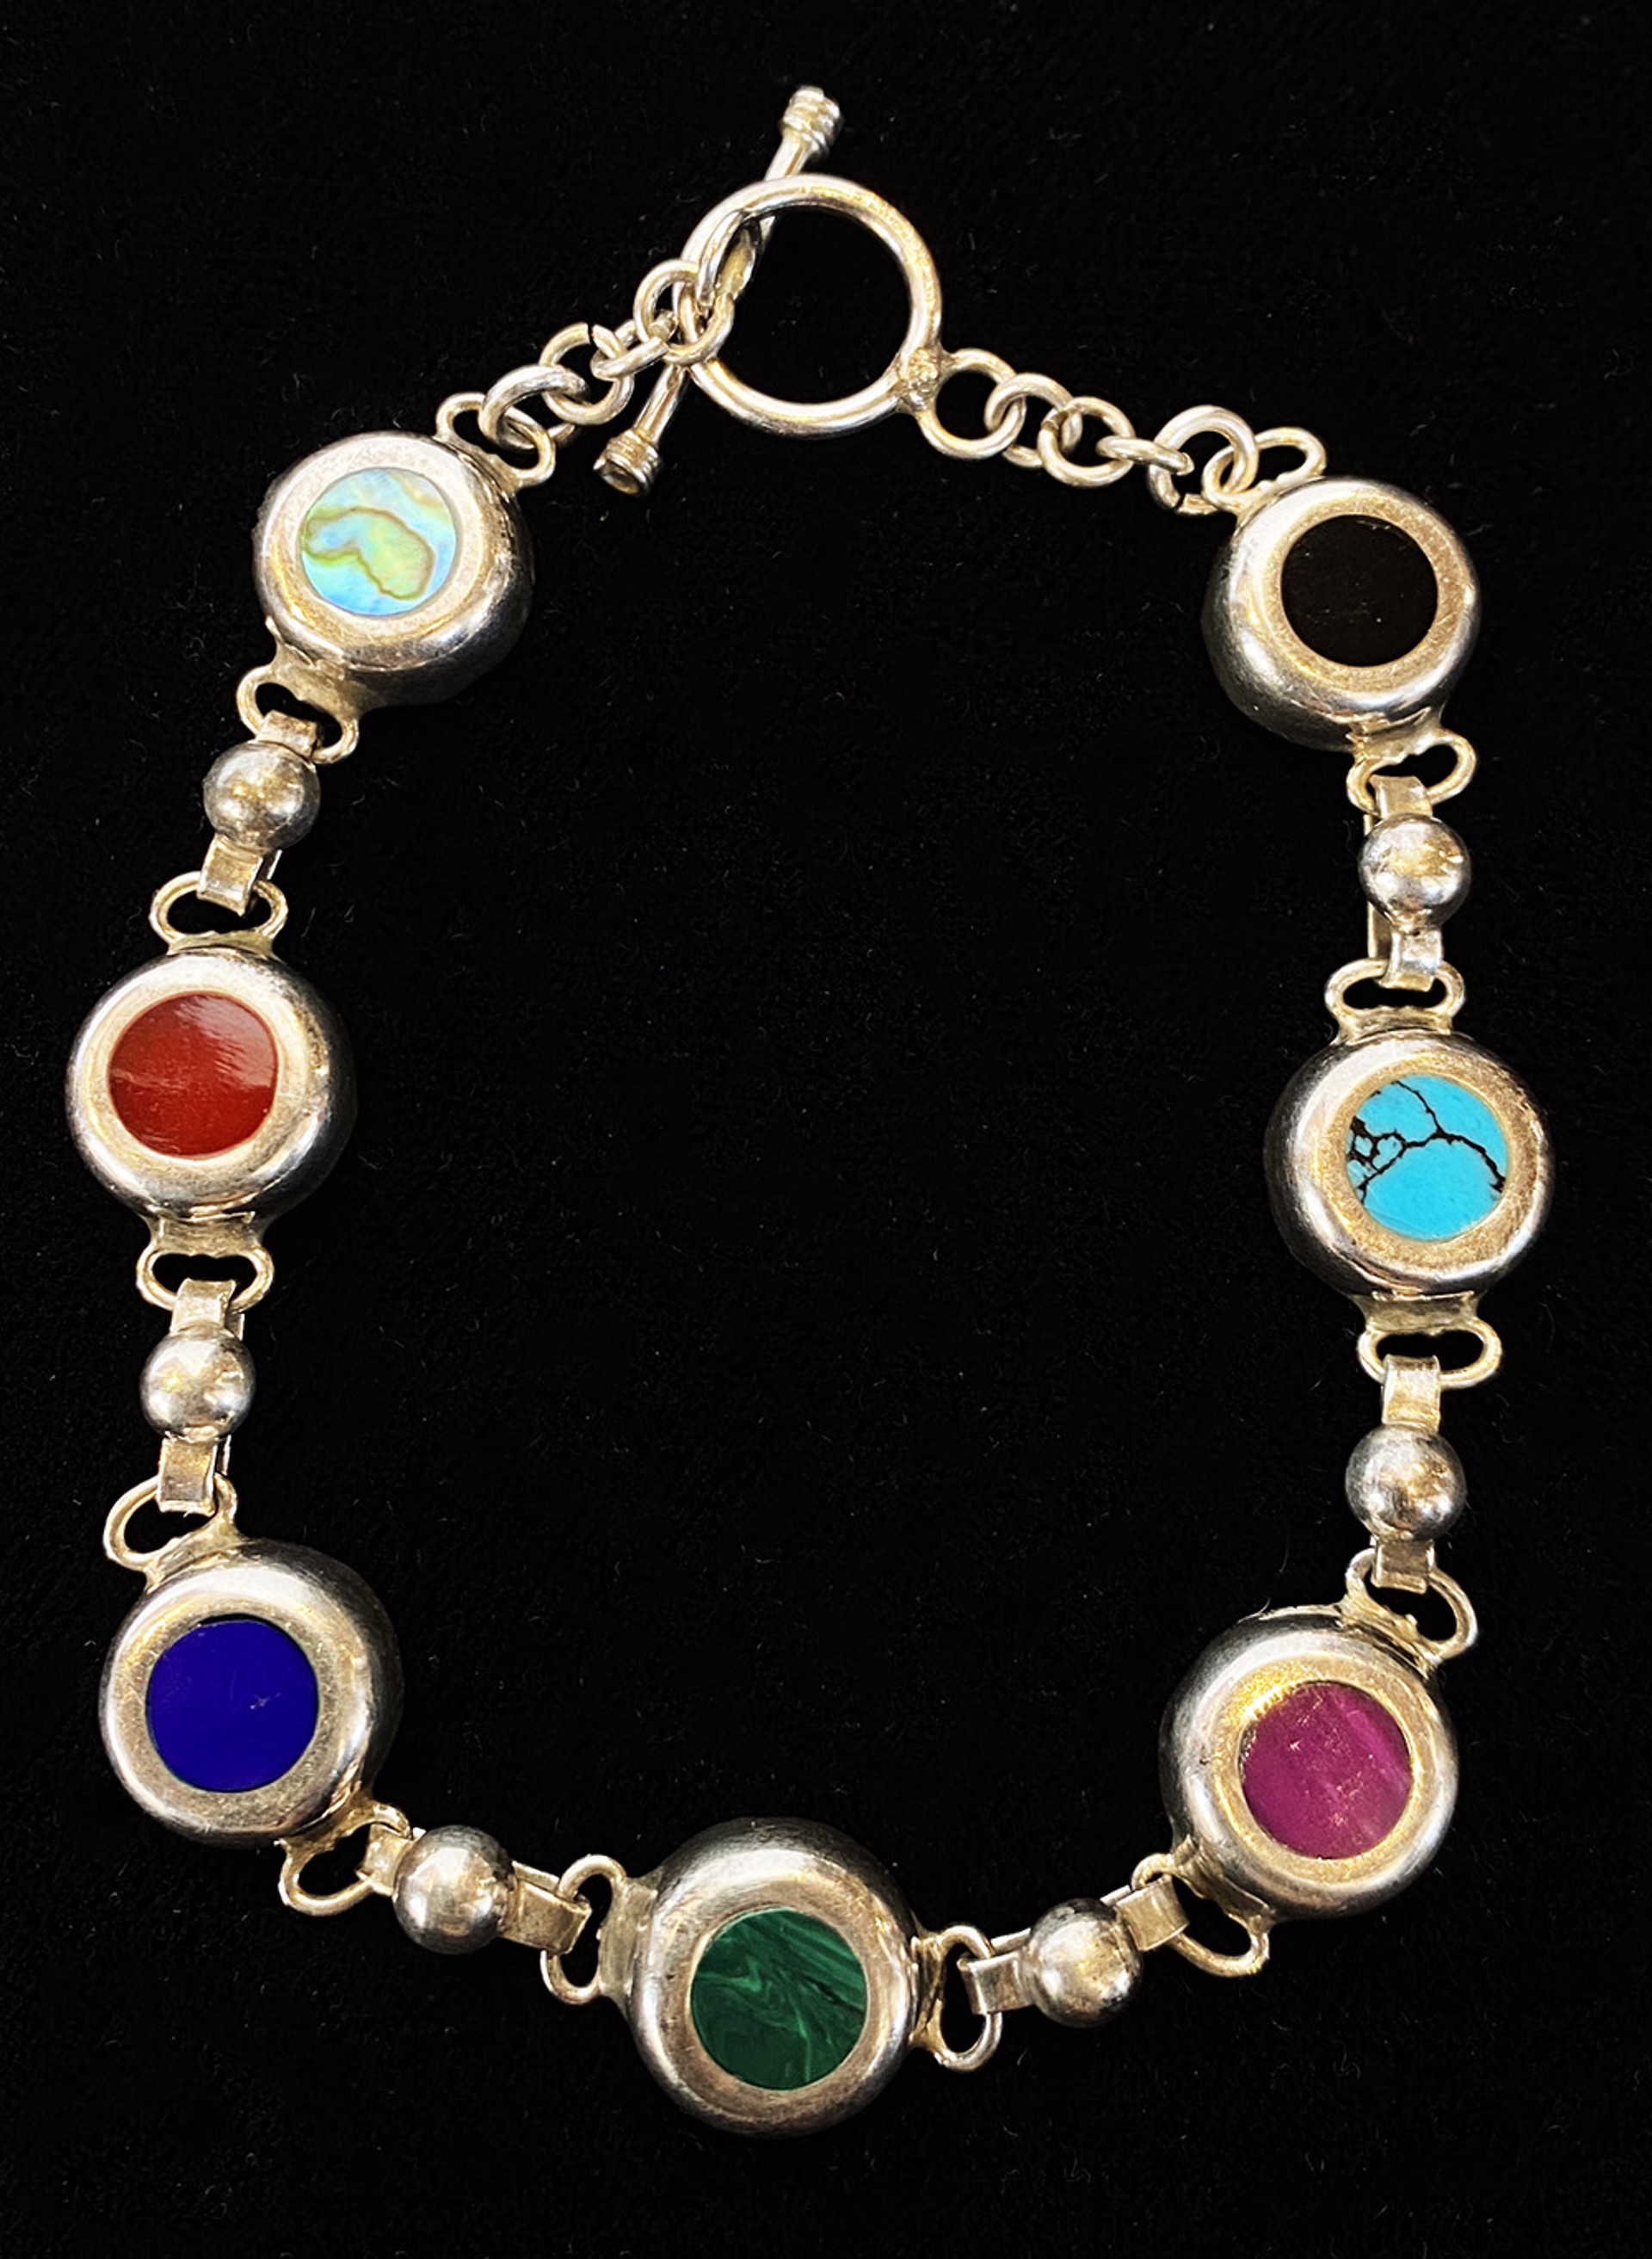 Vintage Mexican Sterling Multistone Bracelet by Artist Unknown